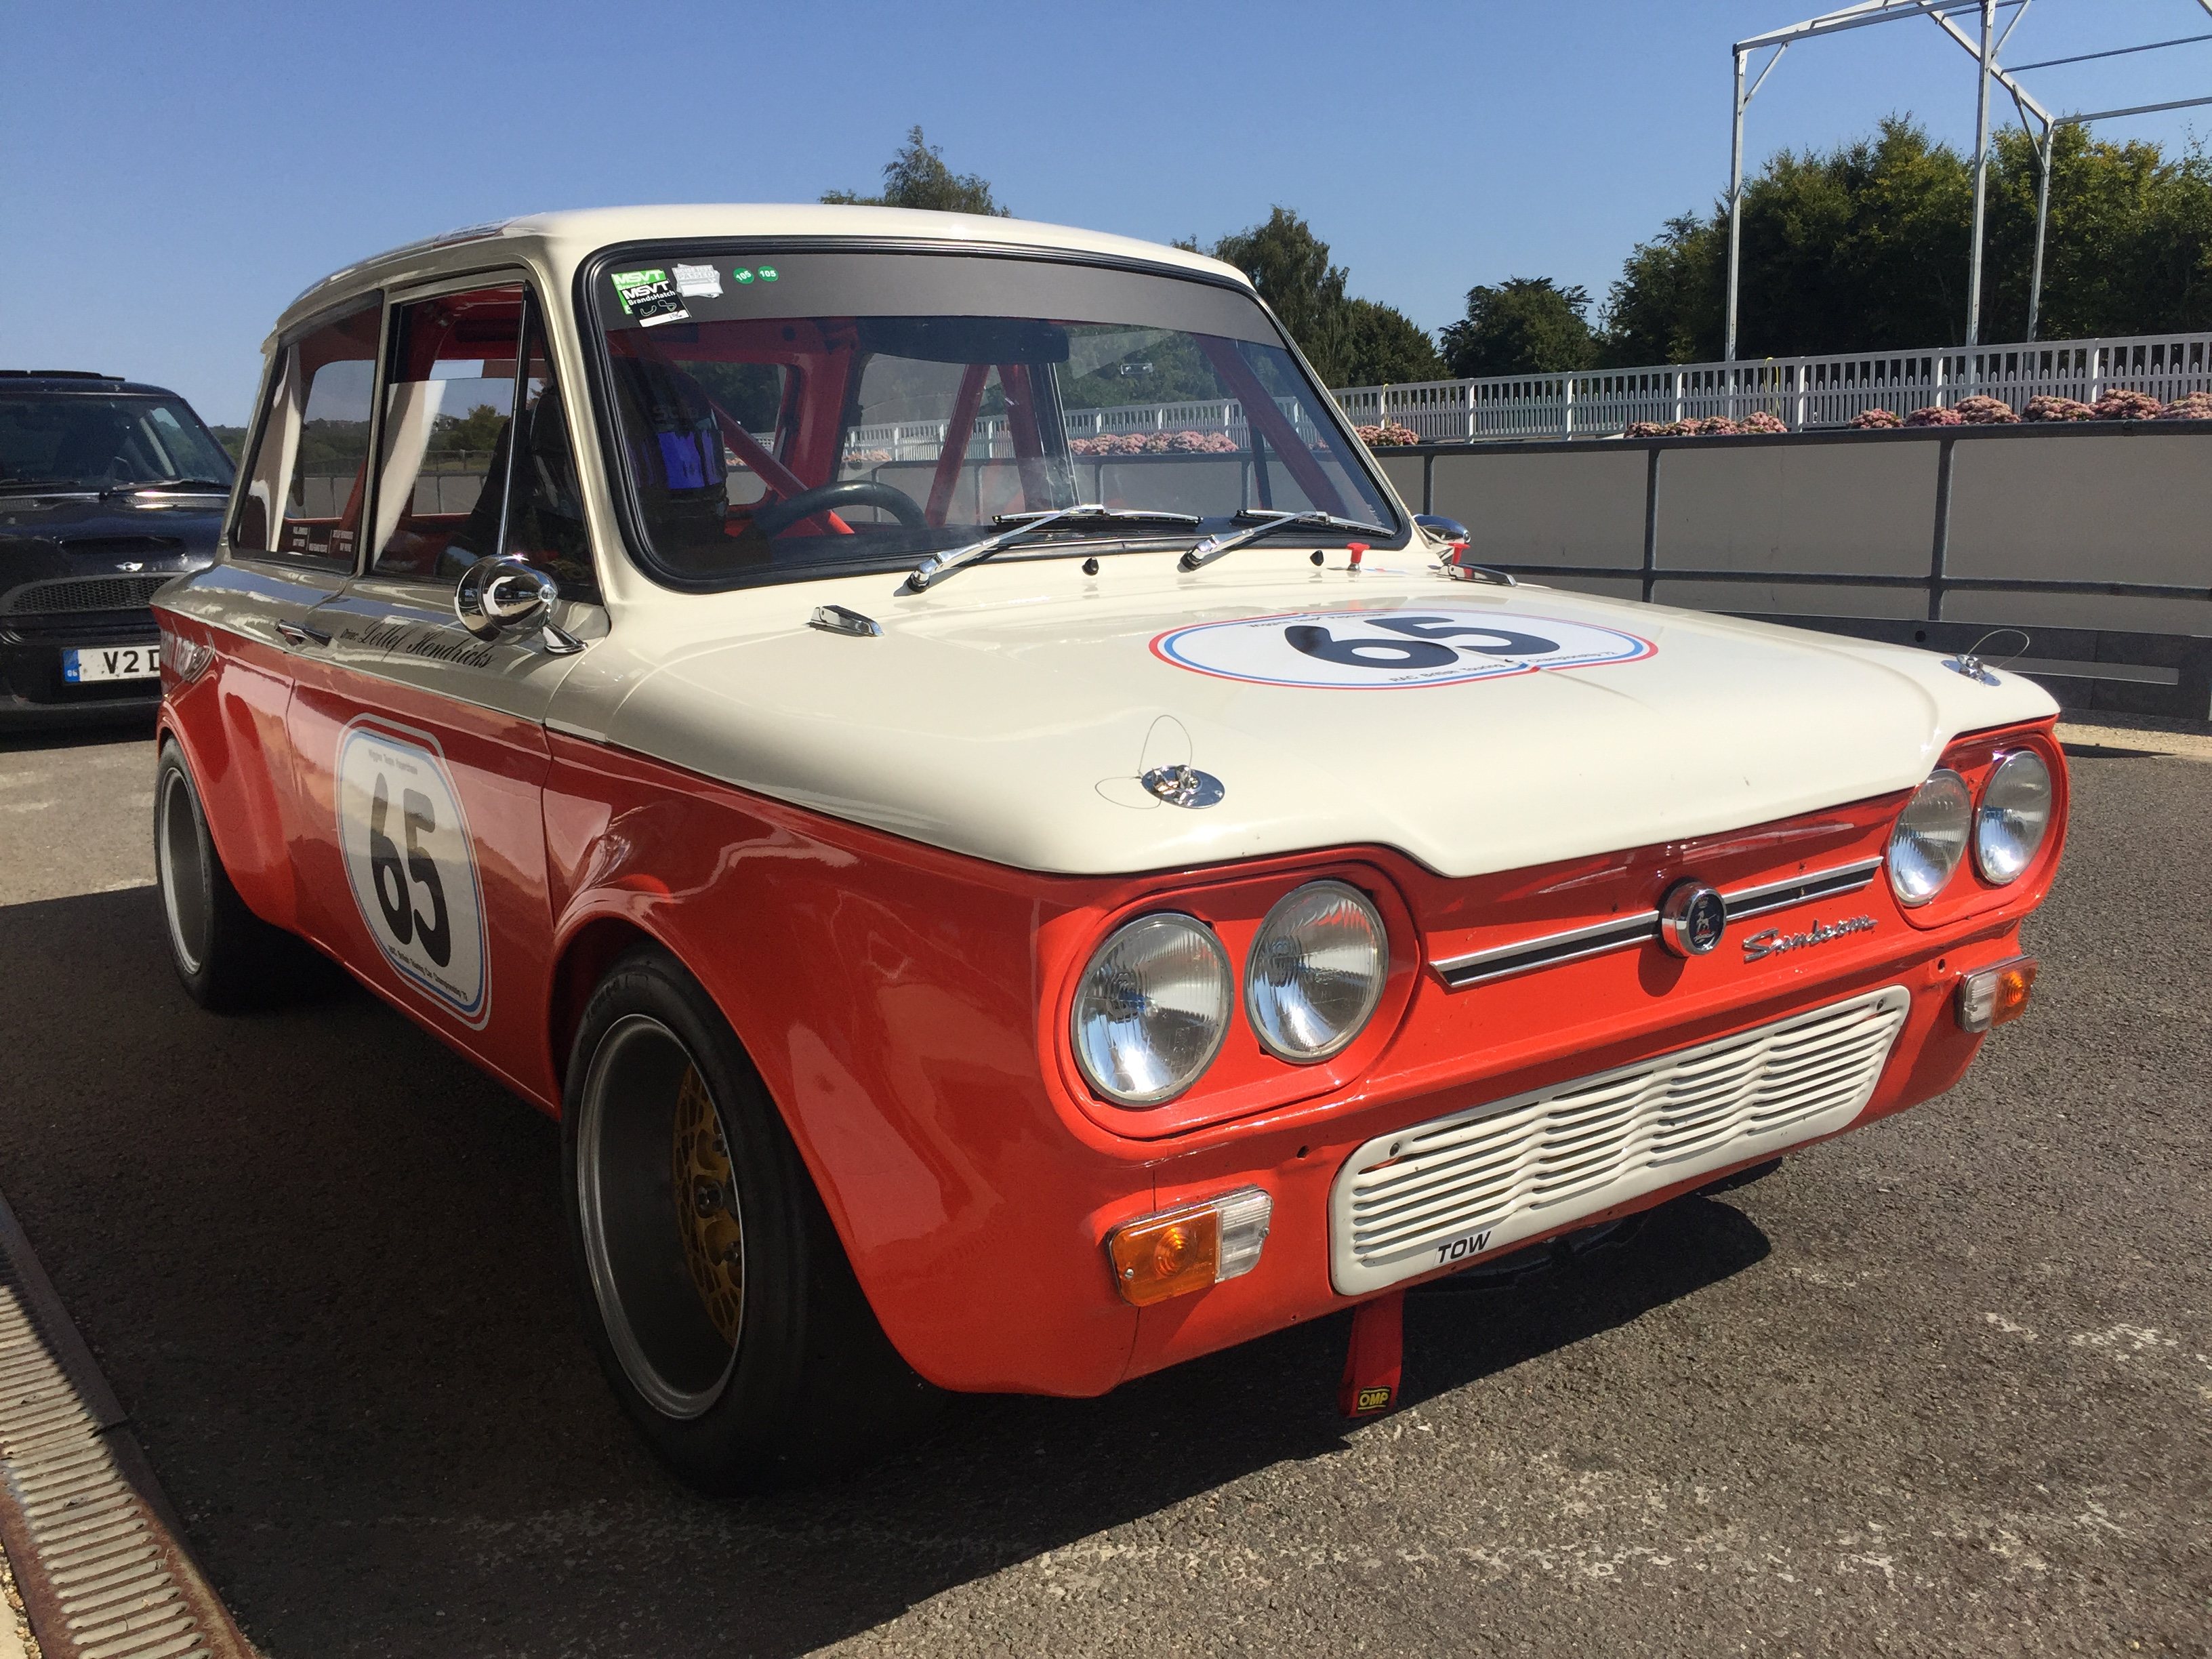 Hartwell Imp - Restoration - Page 27 - Classic Cars and Yesterday's Heroes - PistonHeads